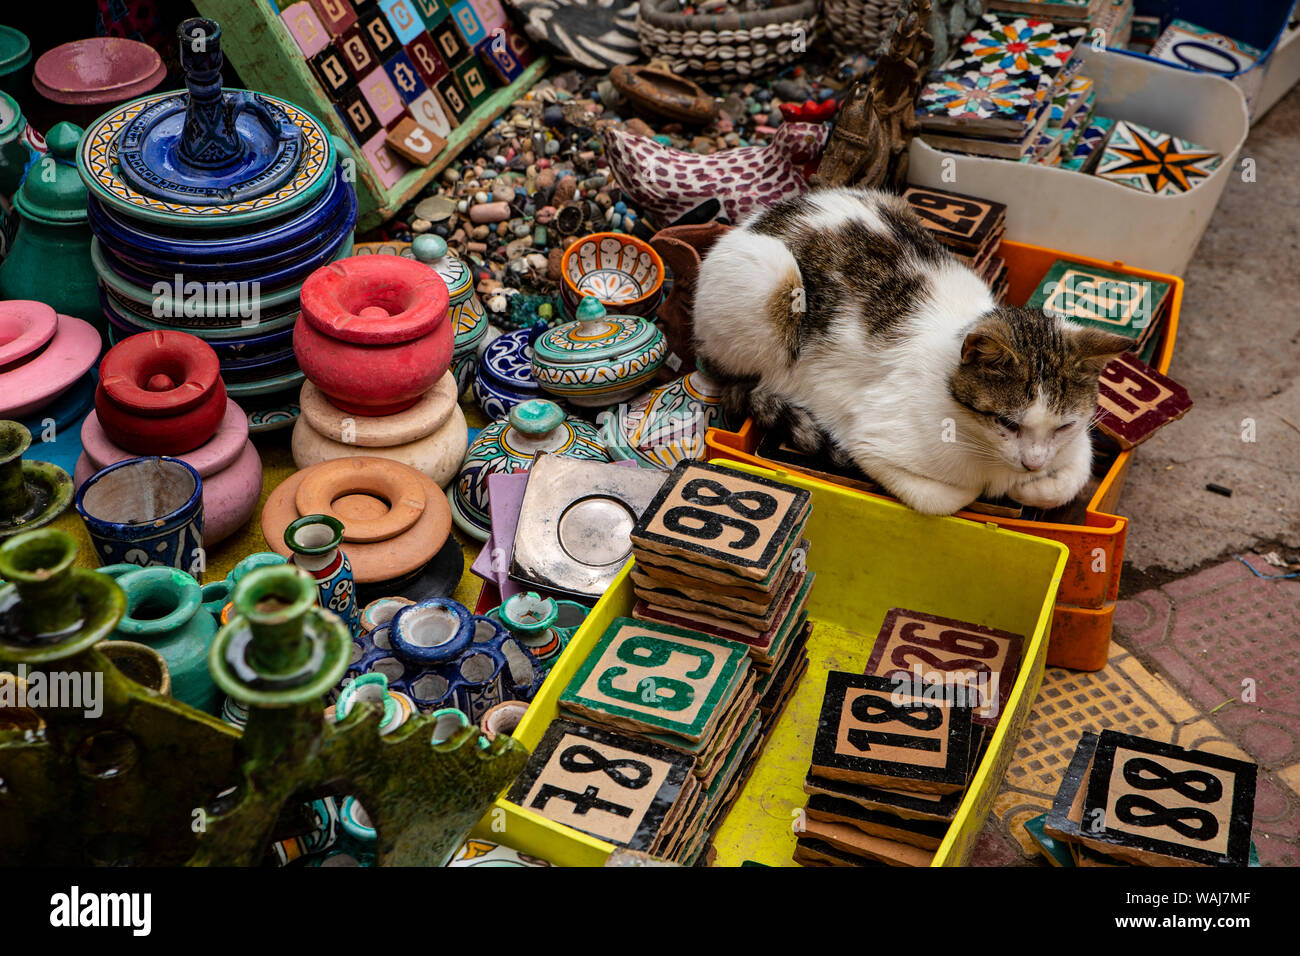 Marrakech, Morocco. Calico cat sitting on ceramic tiles and pottery Stock Photo